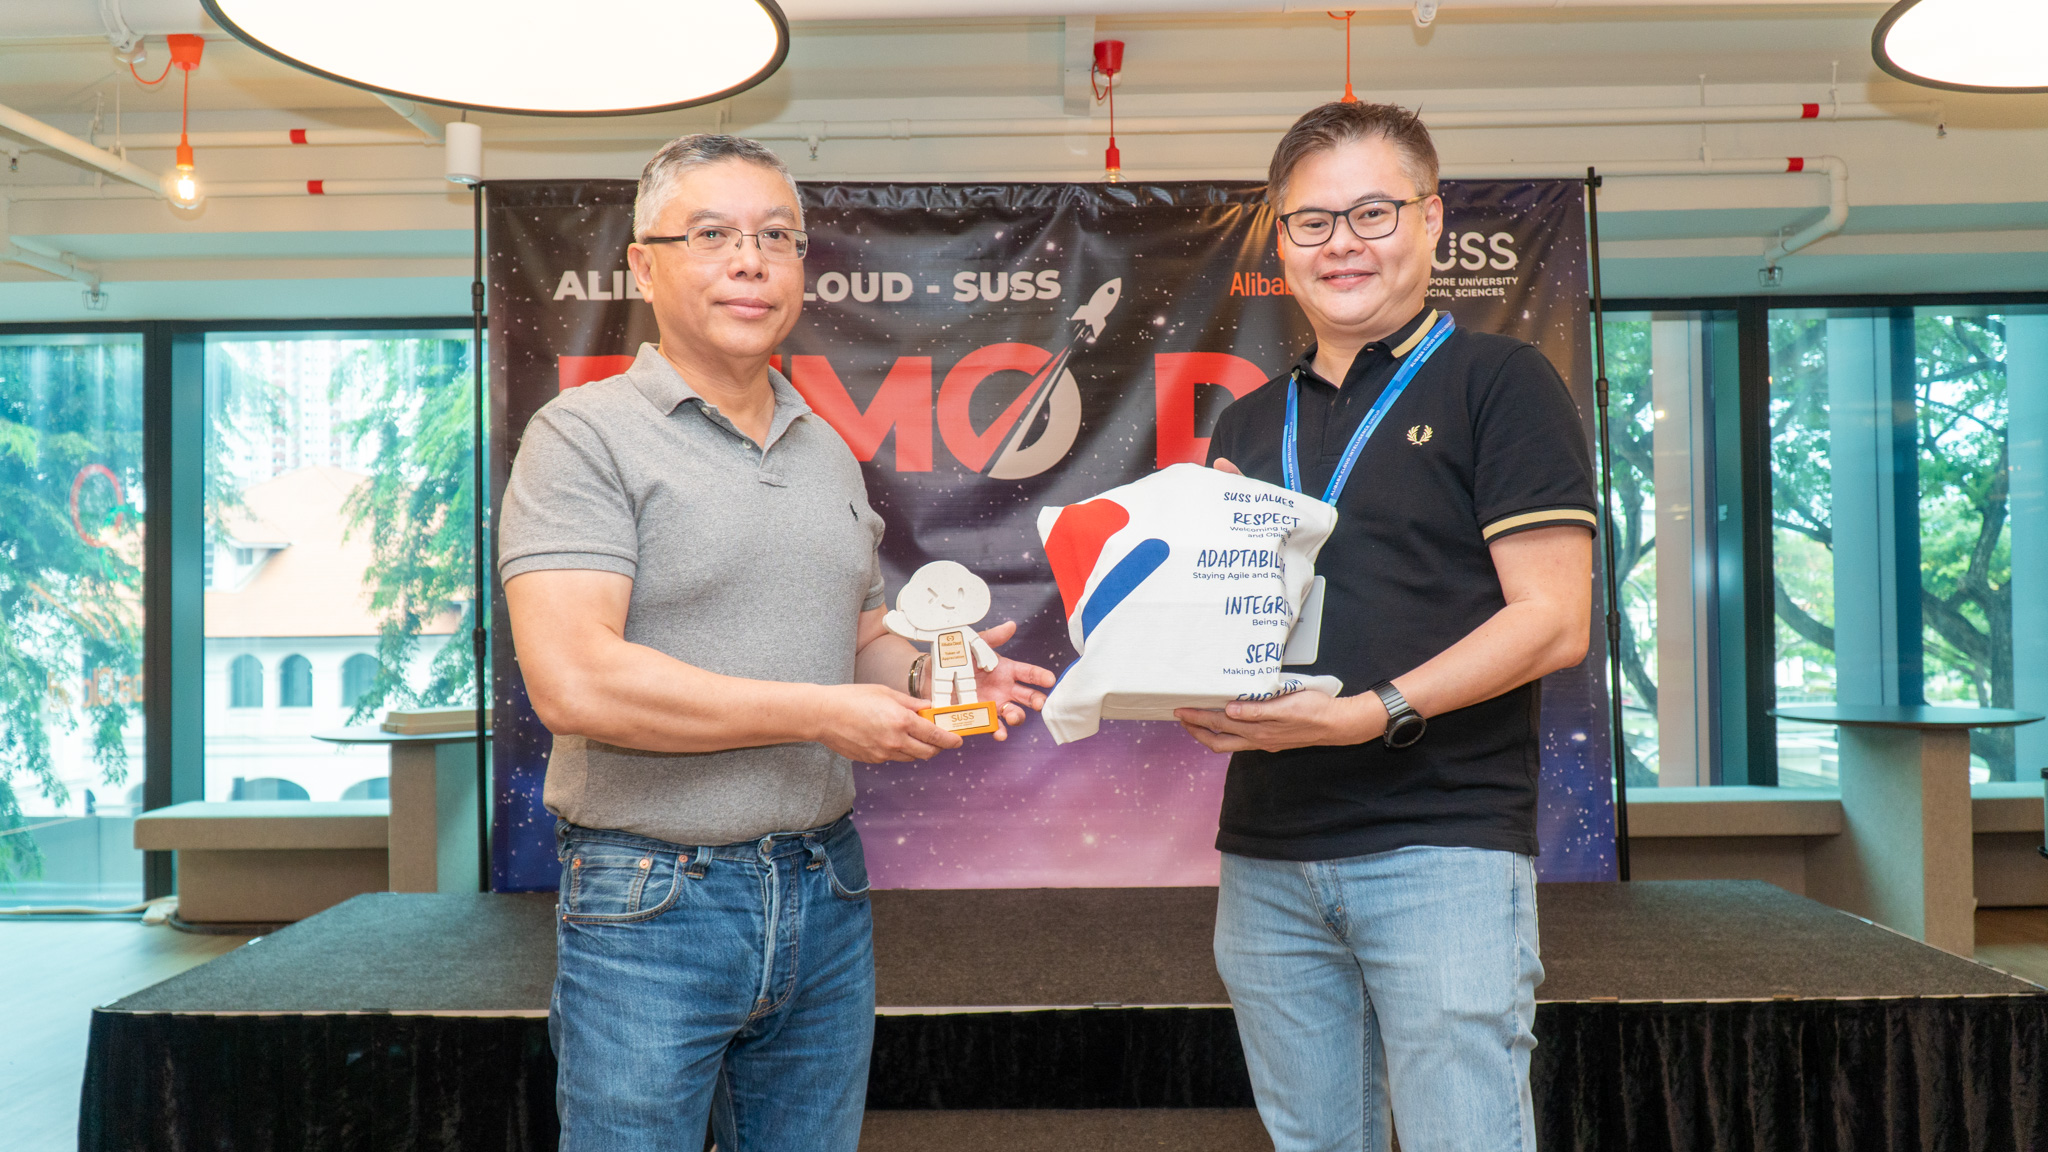 Mr. Choong Hon Keat, Country Manager of Alibaba Cloud, opened the event by emphasizing the importance of partnerships. SUSS Provost, Professor Robbie Goh, highlighted the essence of entrepreneurship